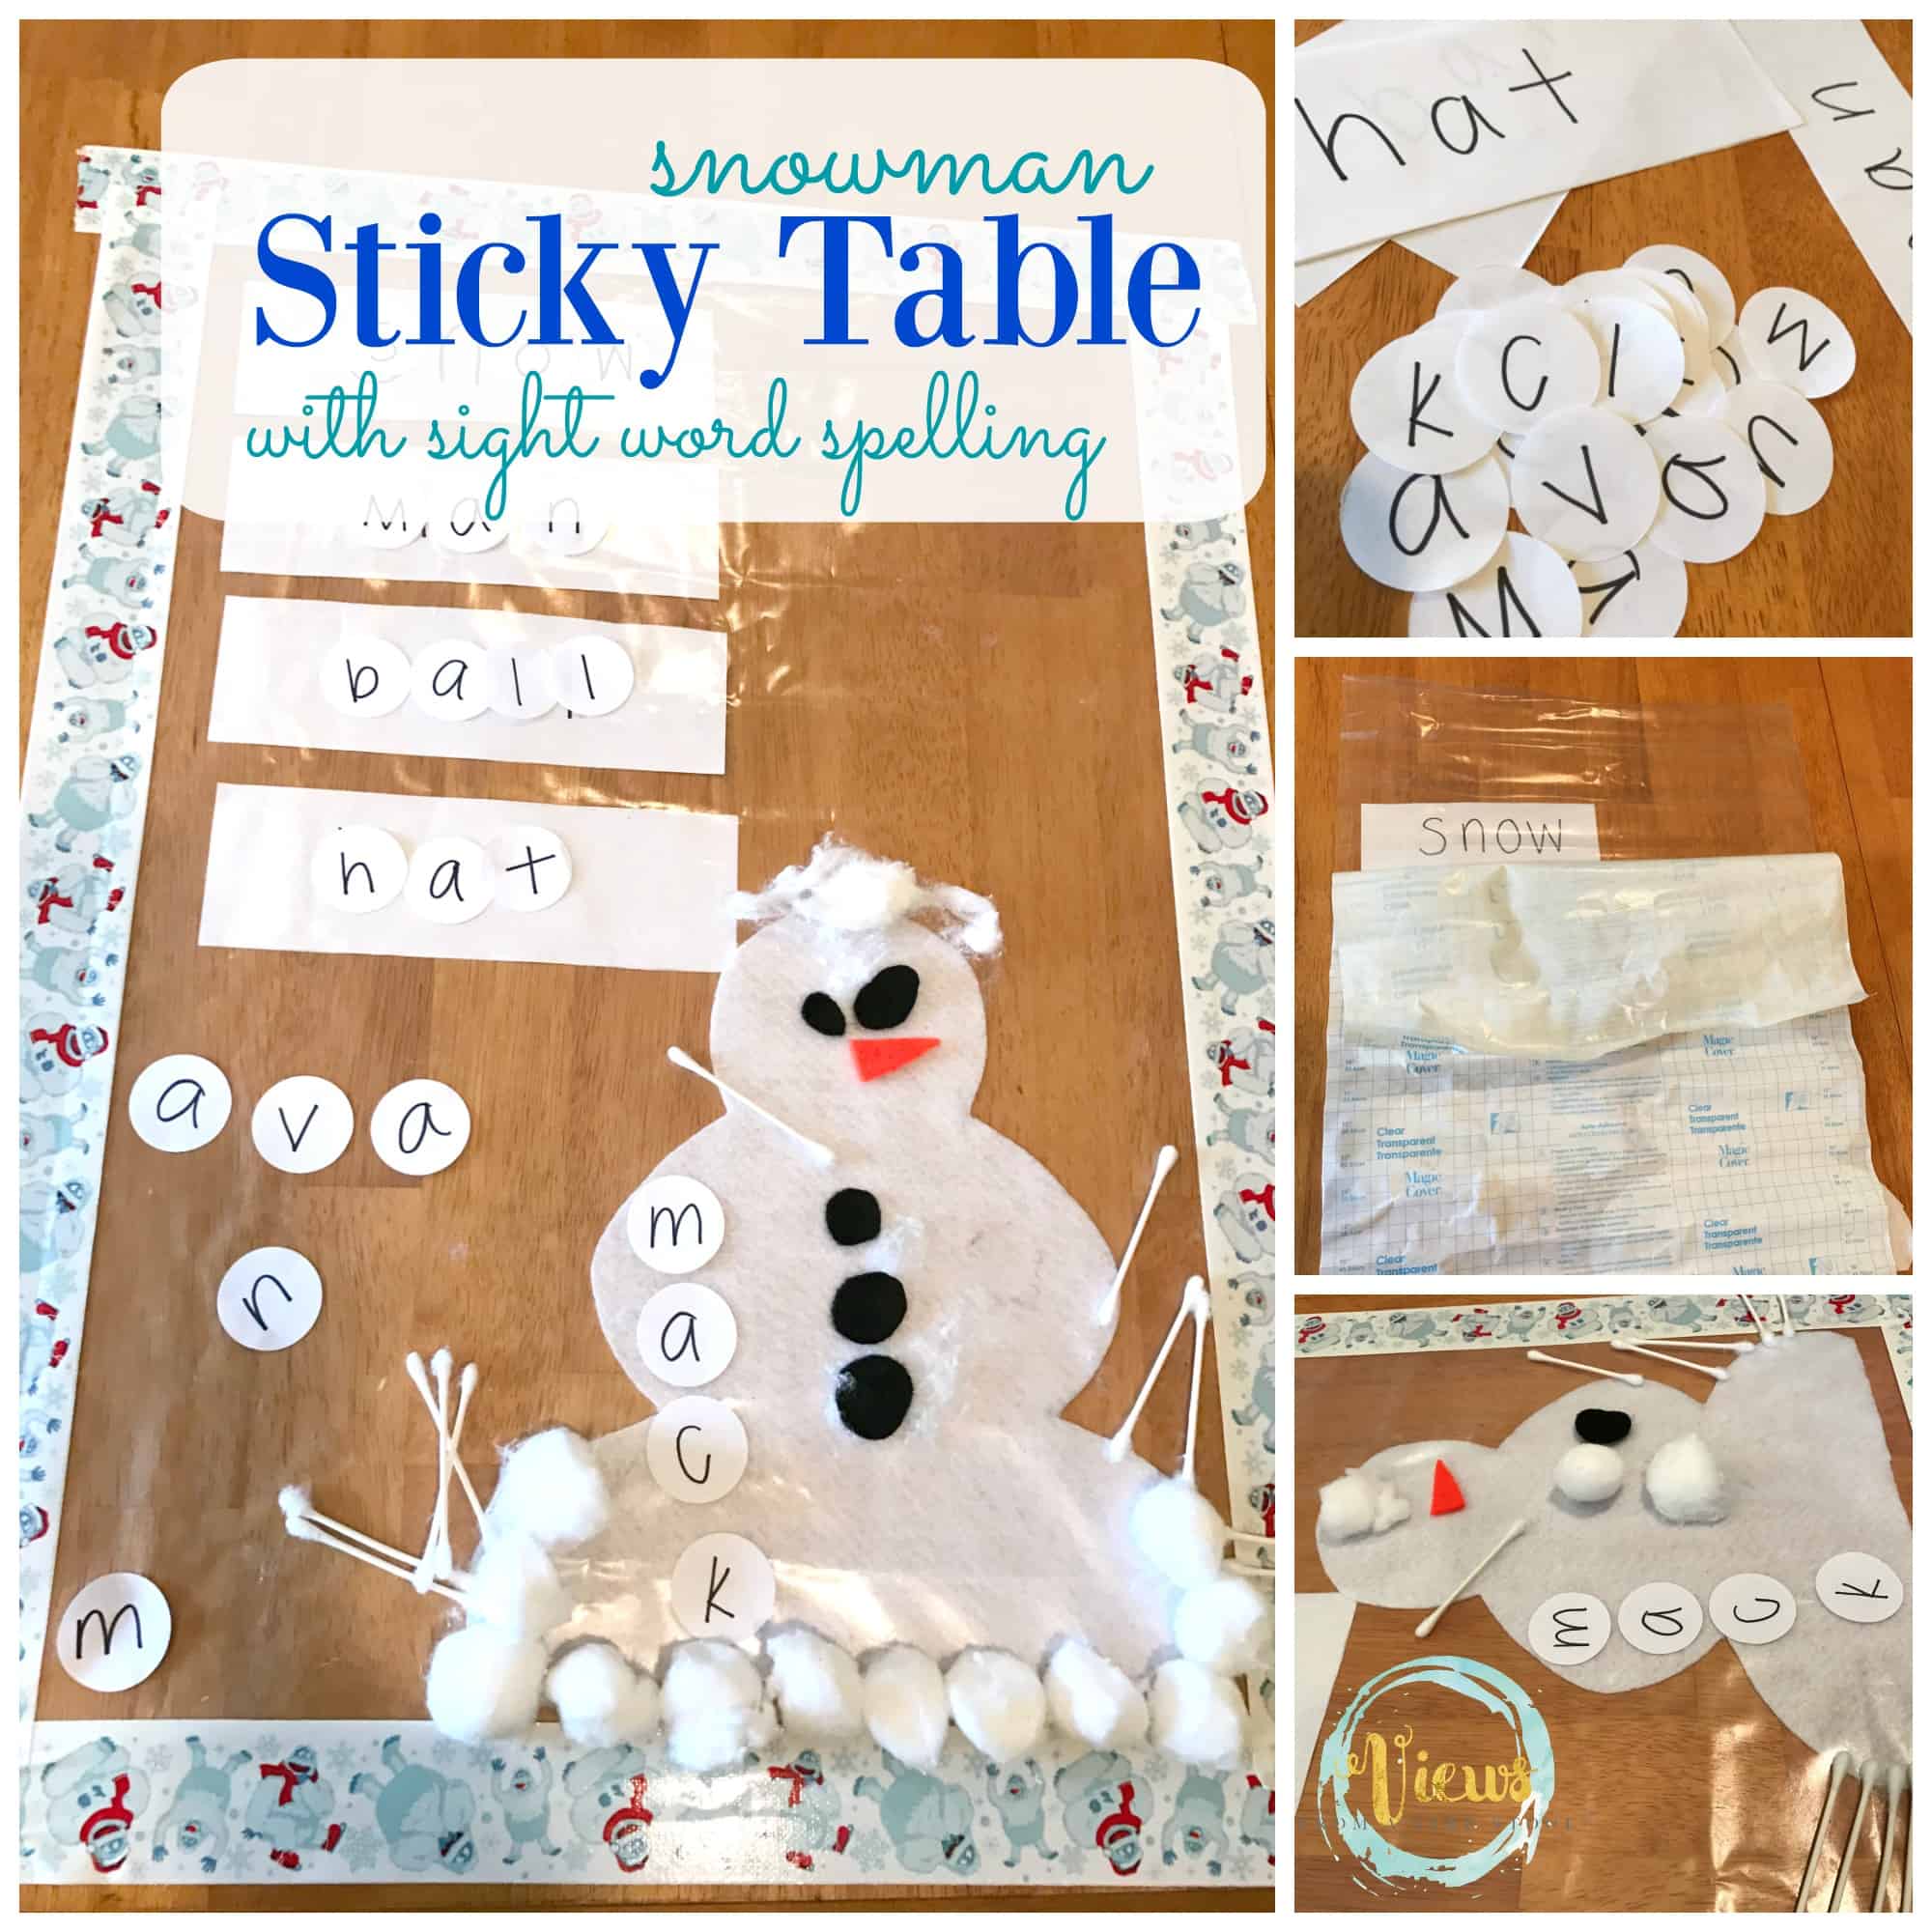 This activity is perfect for kids of varying ages. Decorate the snowman or spell snowball sight words on a sticky table! Preschoolers love this!